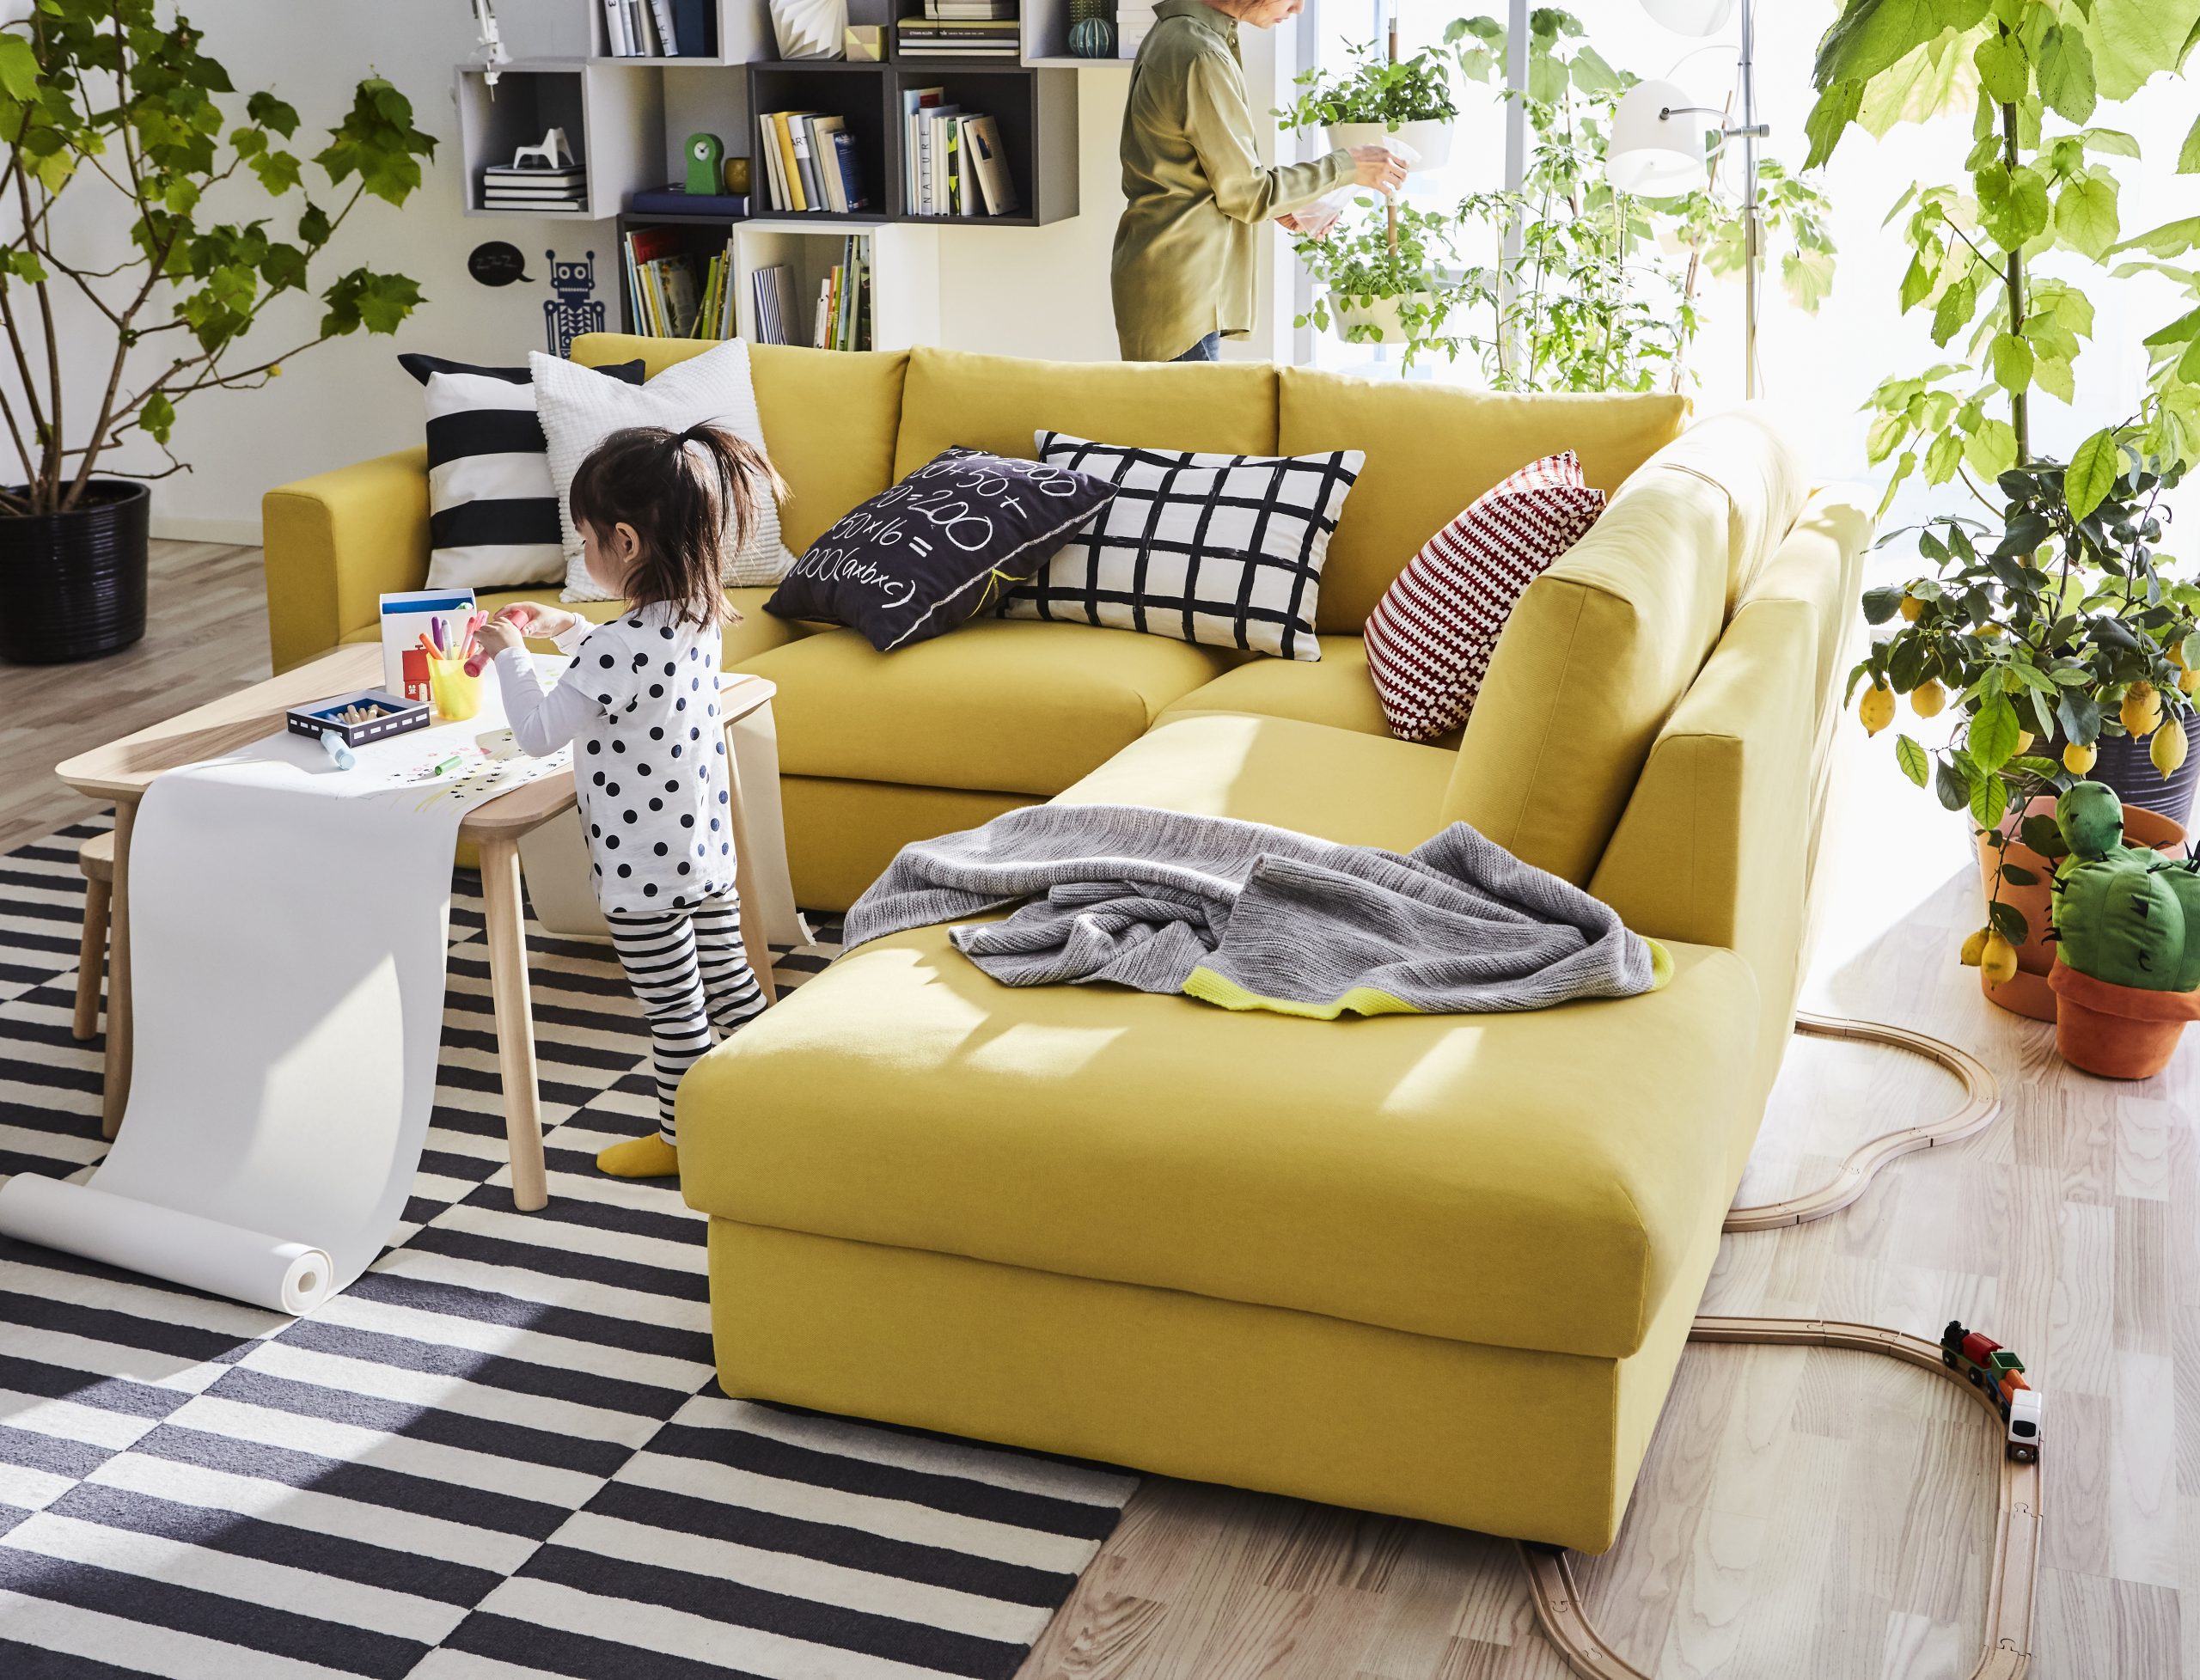 Yellow sofa in living room with table for arts and crafts for kids